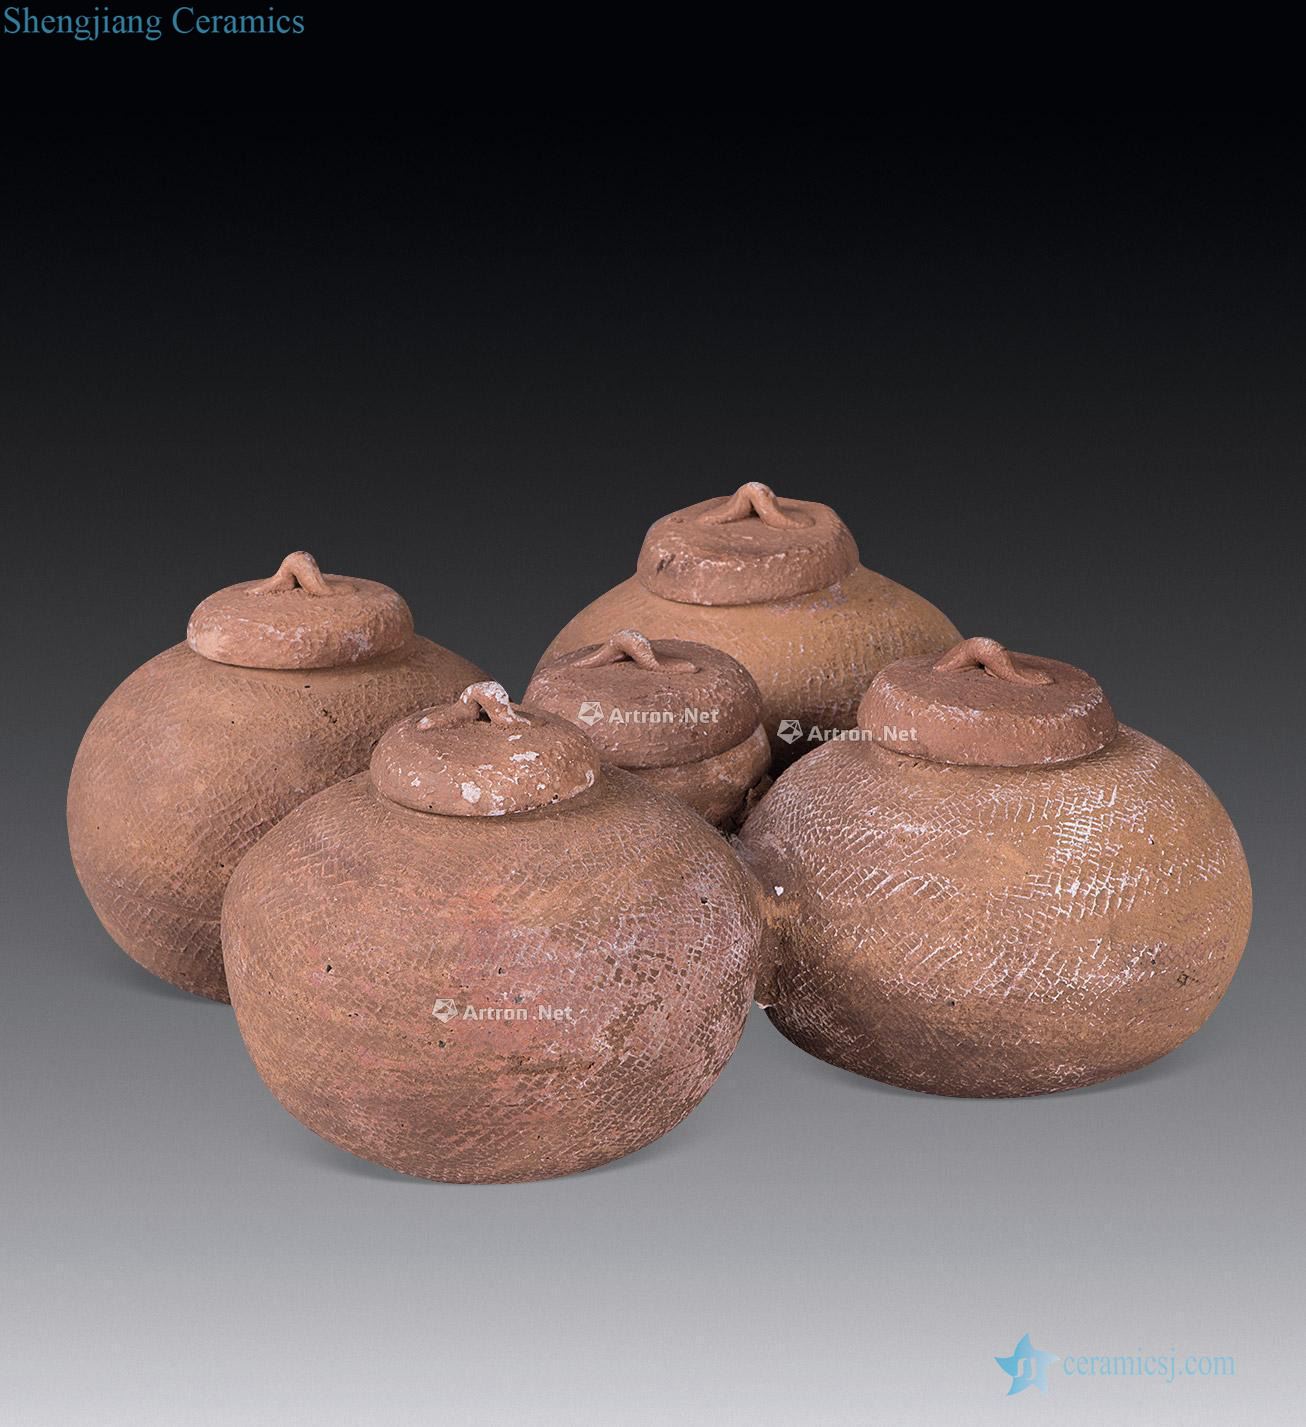 The warring states period pottery